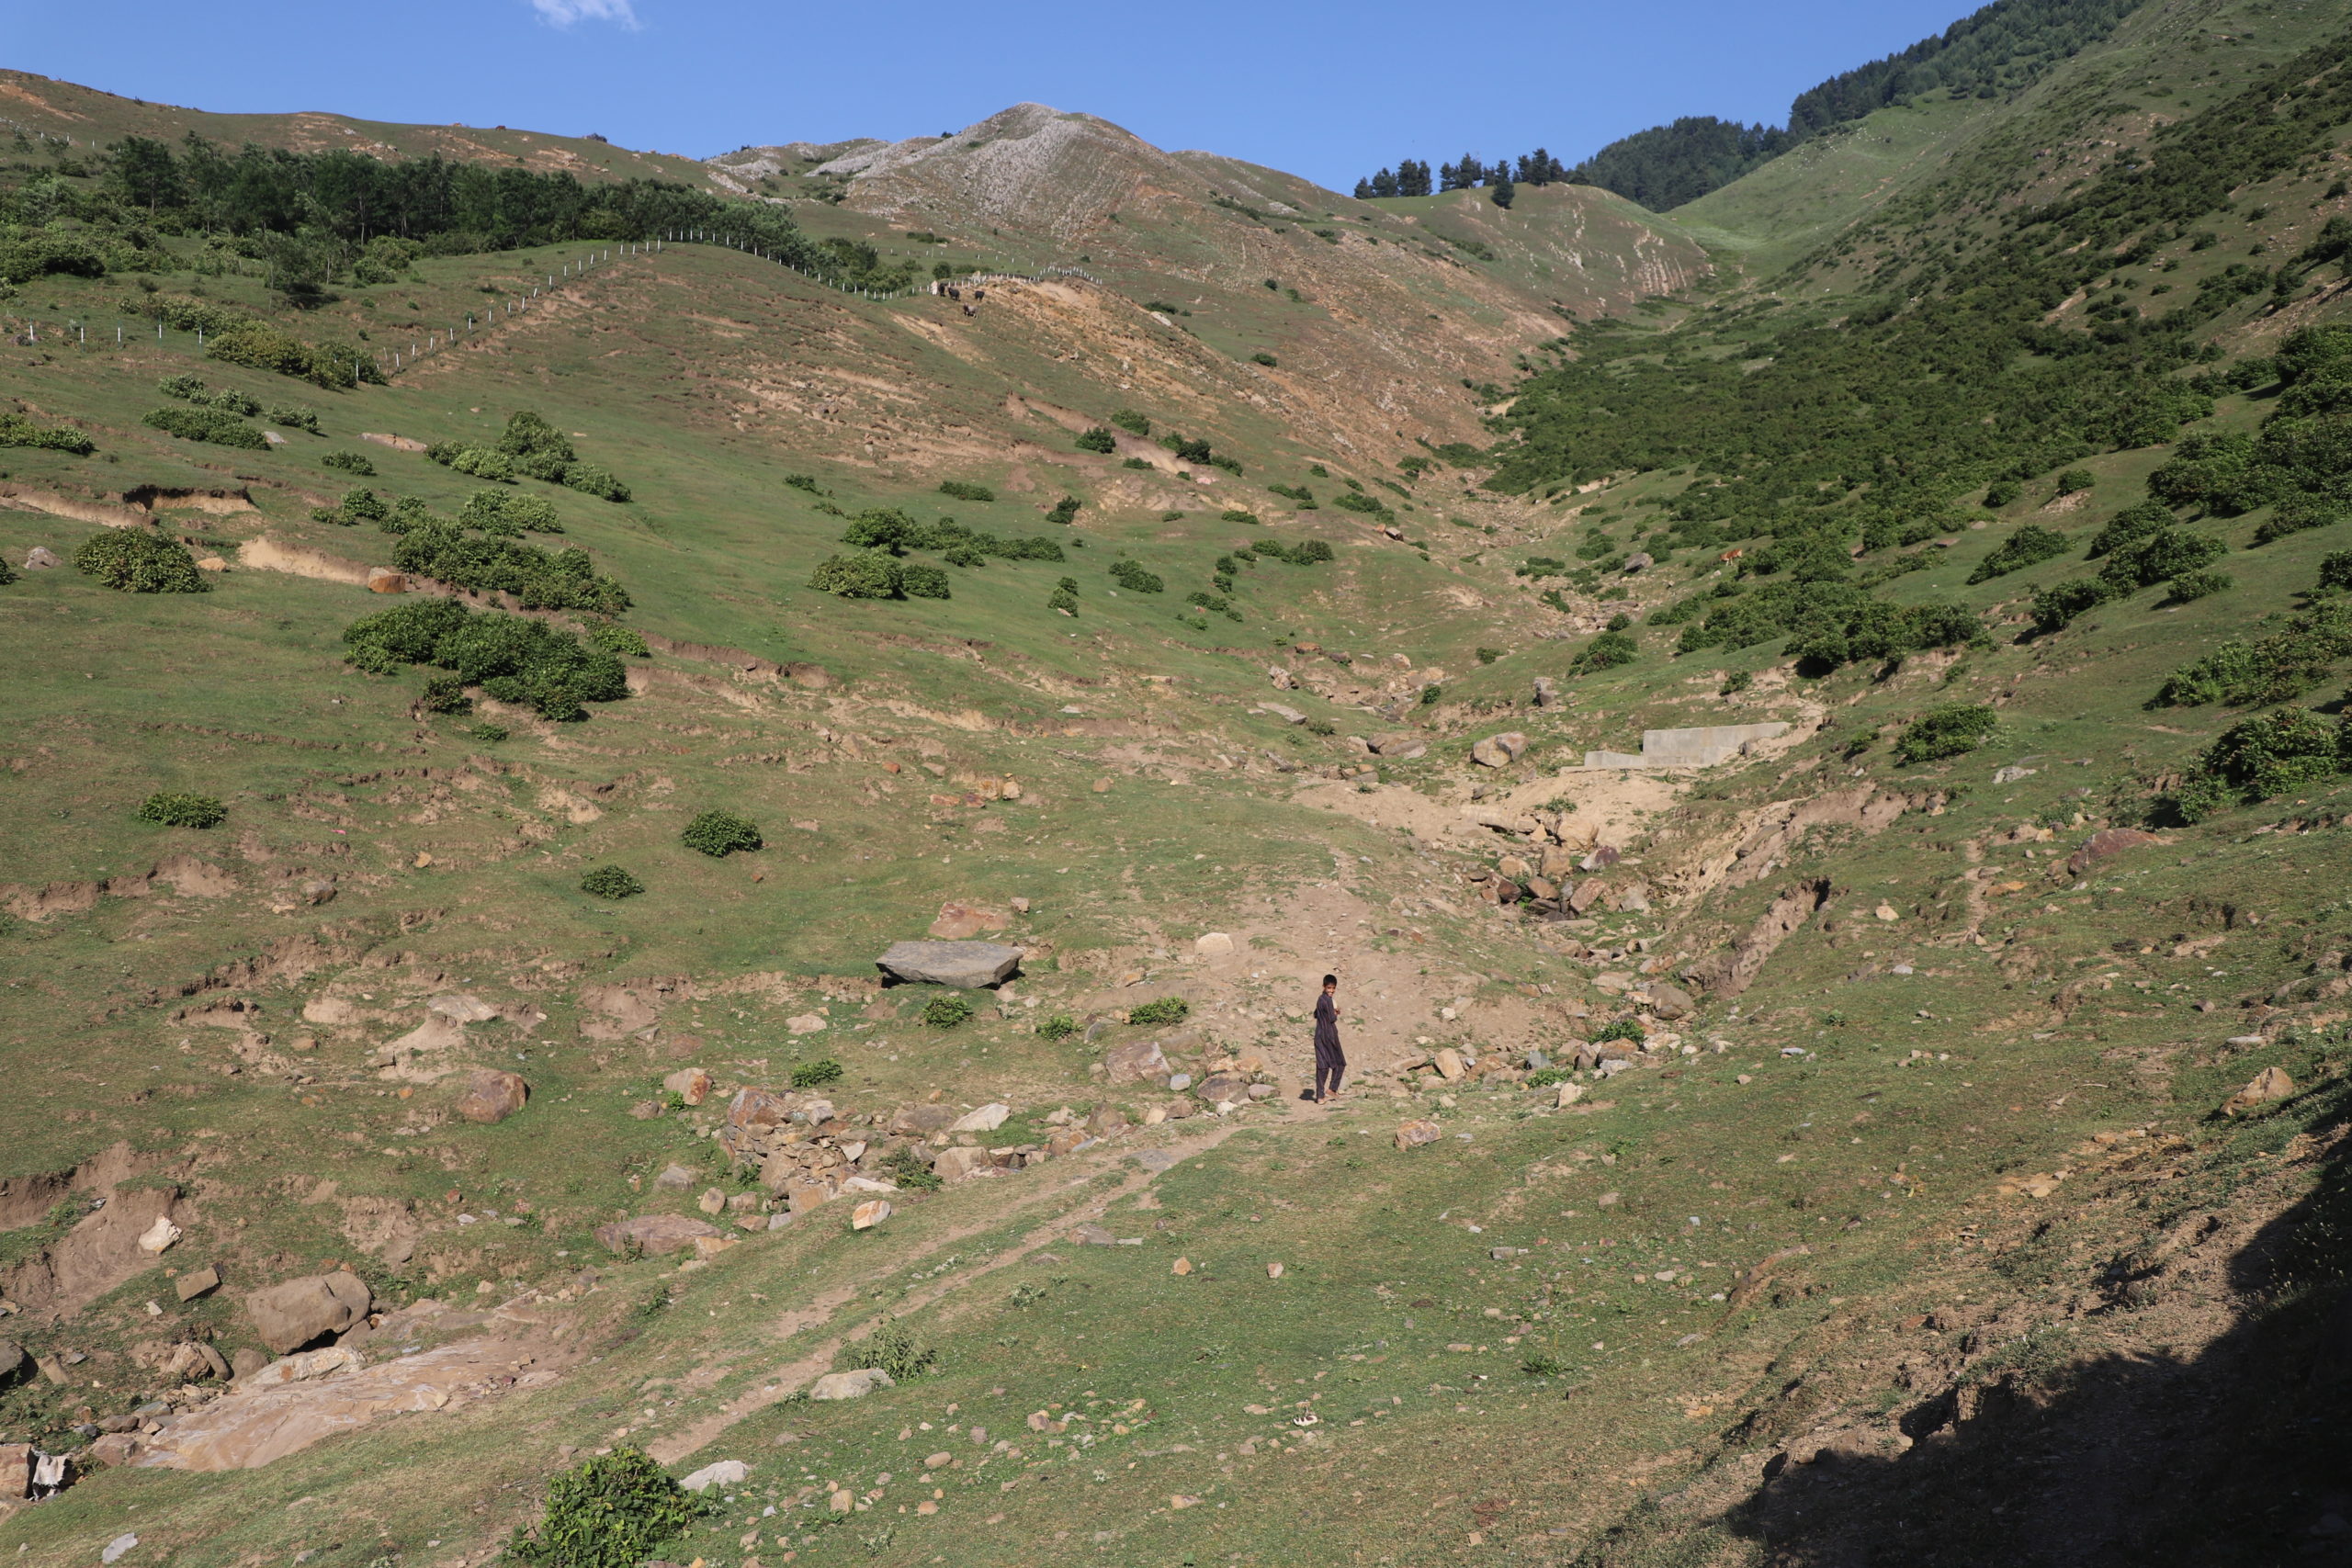 person standing in hilly pasture with dry vegetation